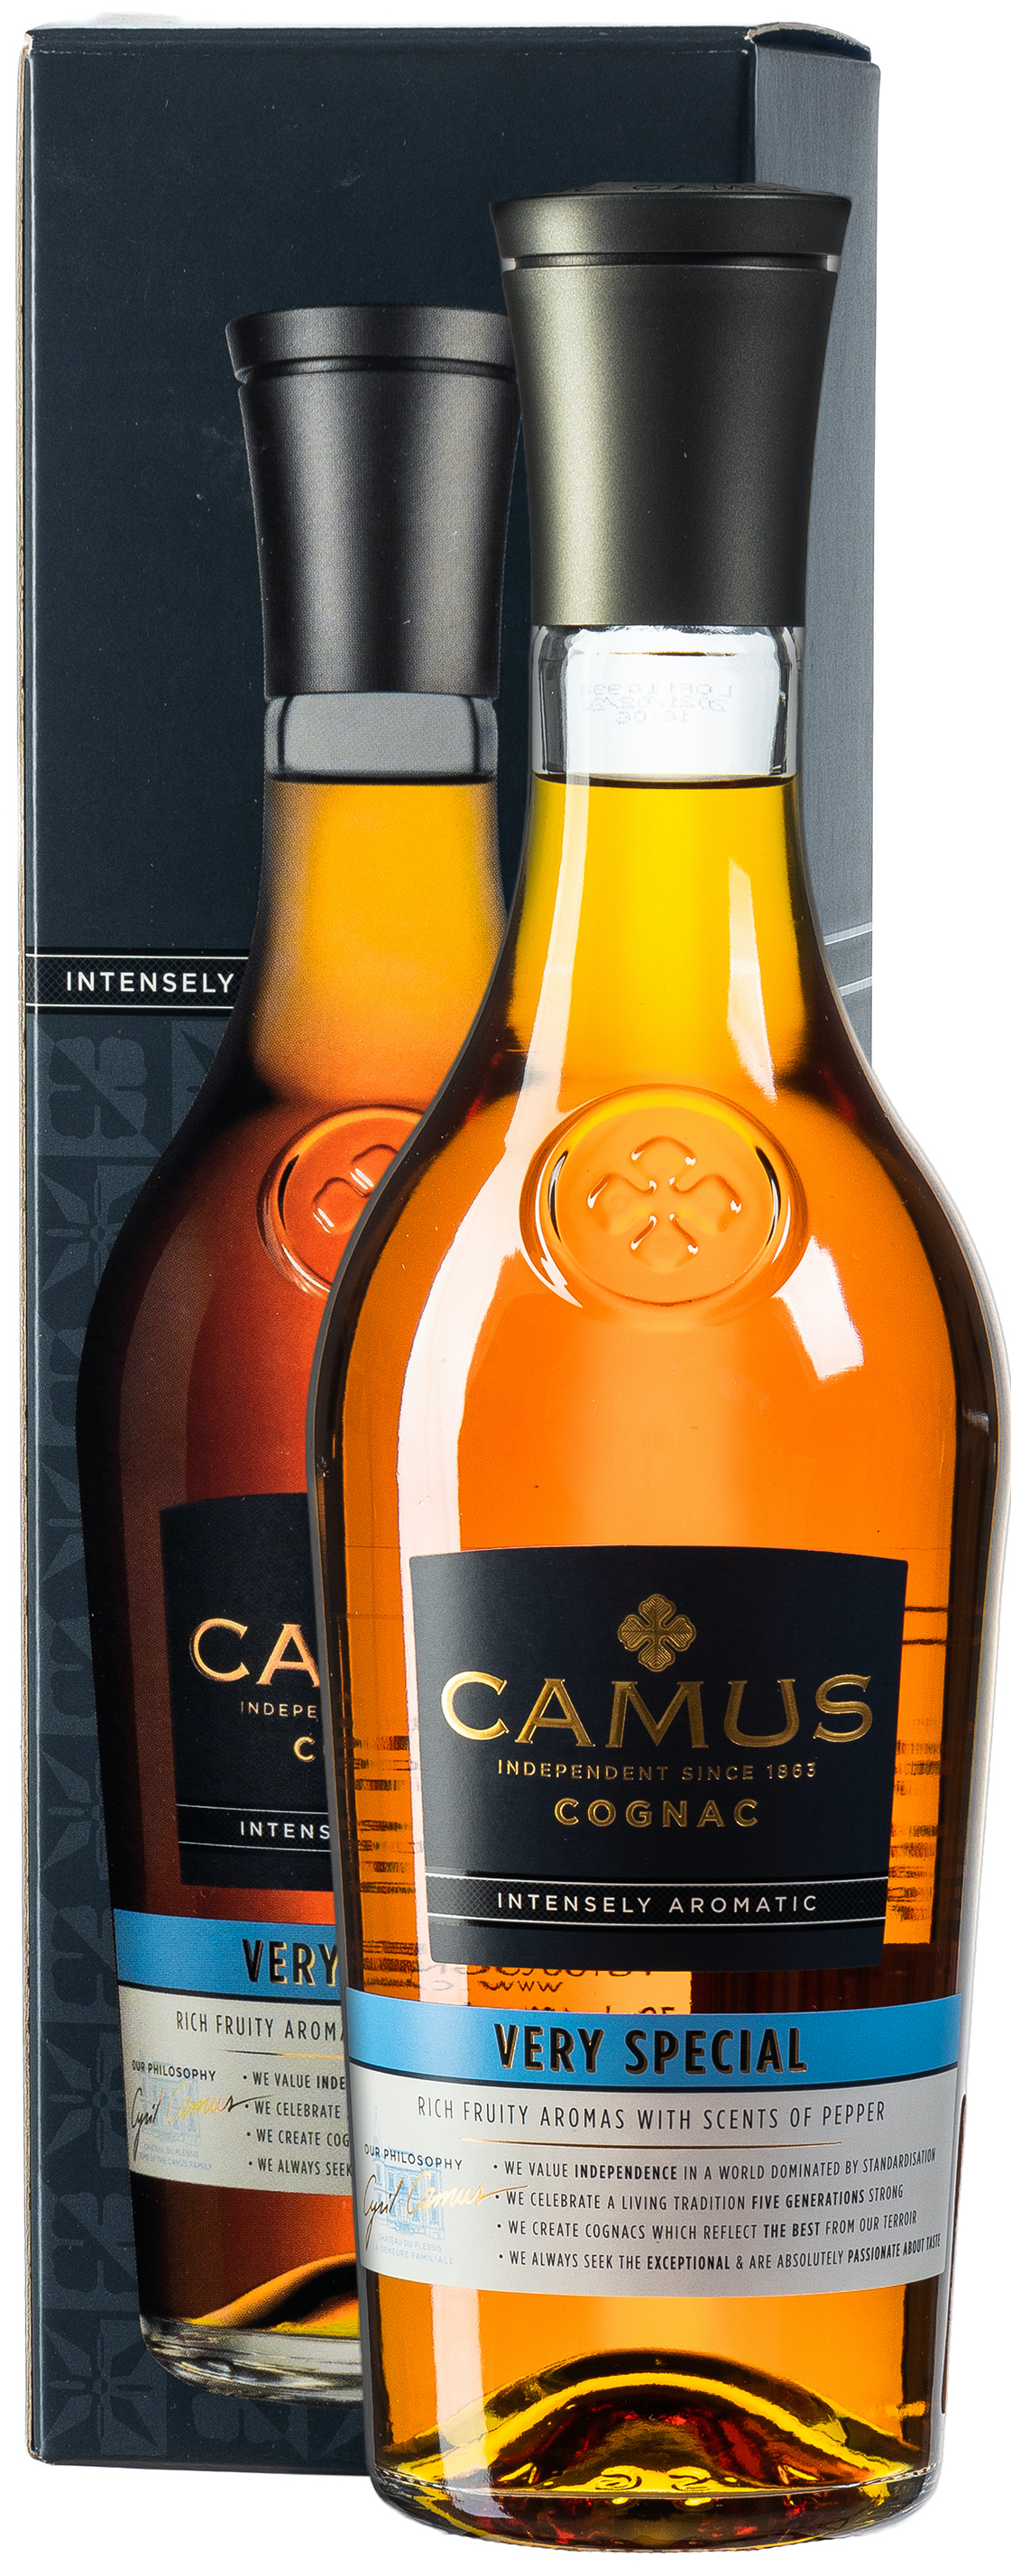 Camus Very Special Intensely Aromatic Cognac 40% vol. 0,70L